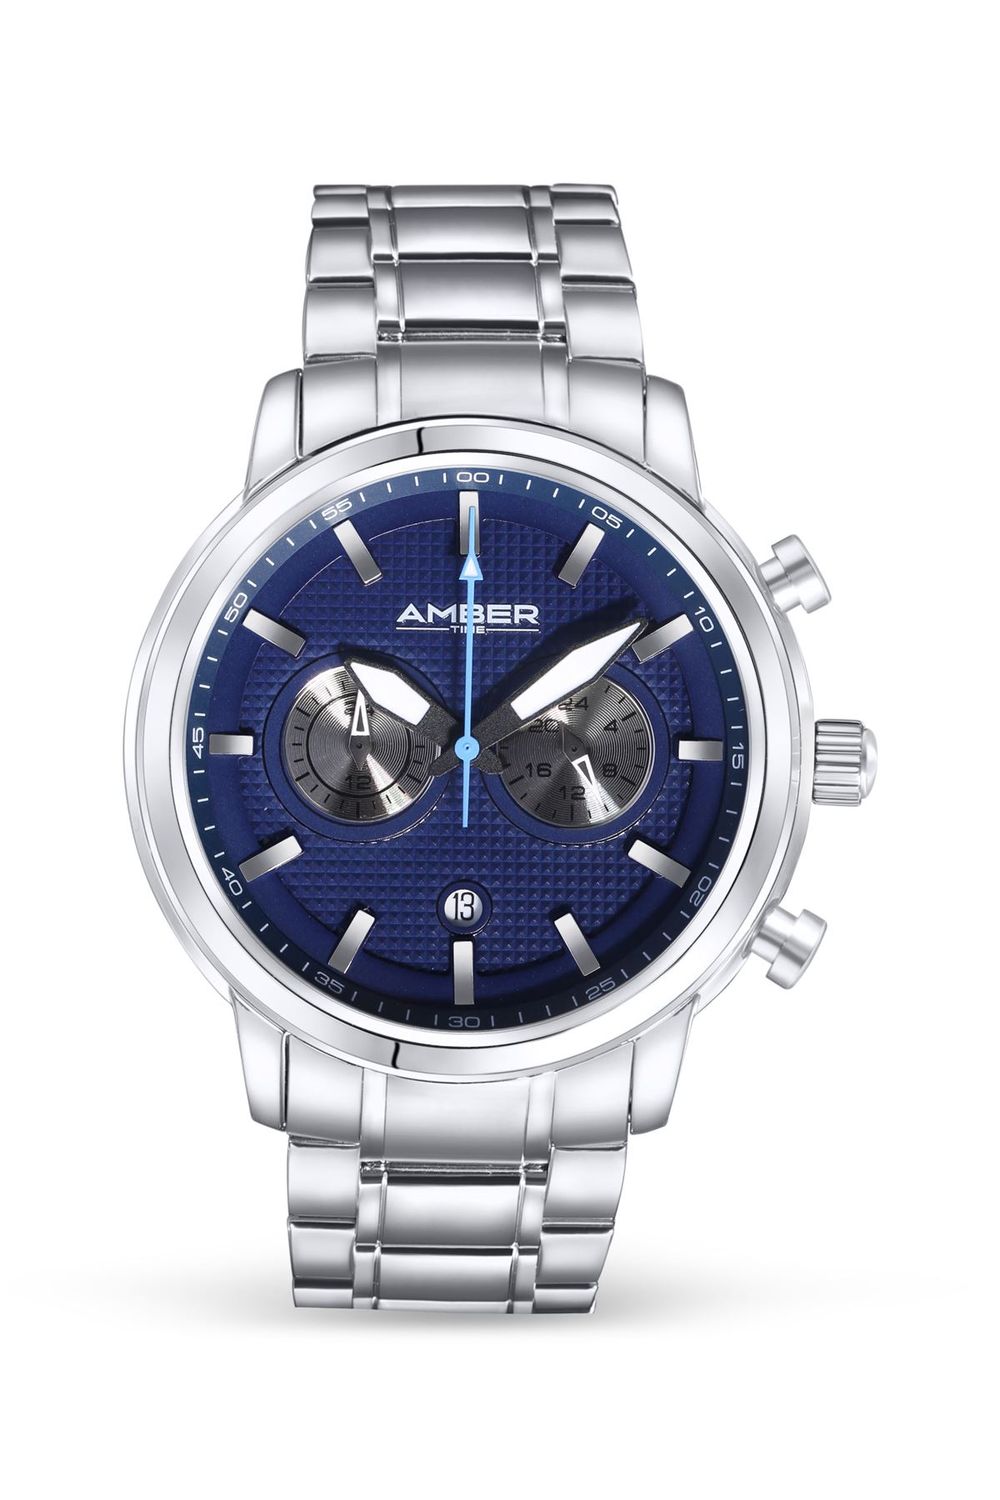 Amber Time Men's Quartz Chronograph Watch Stainless Steel Band - Blue